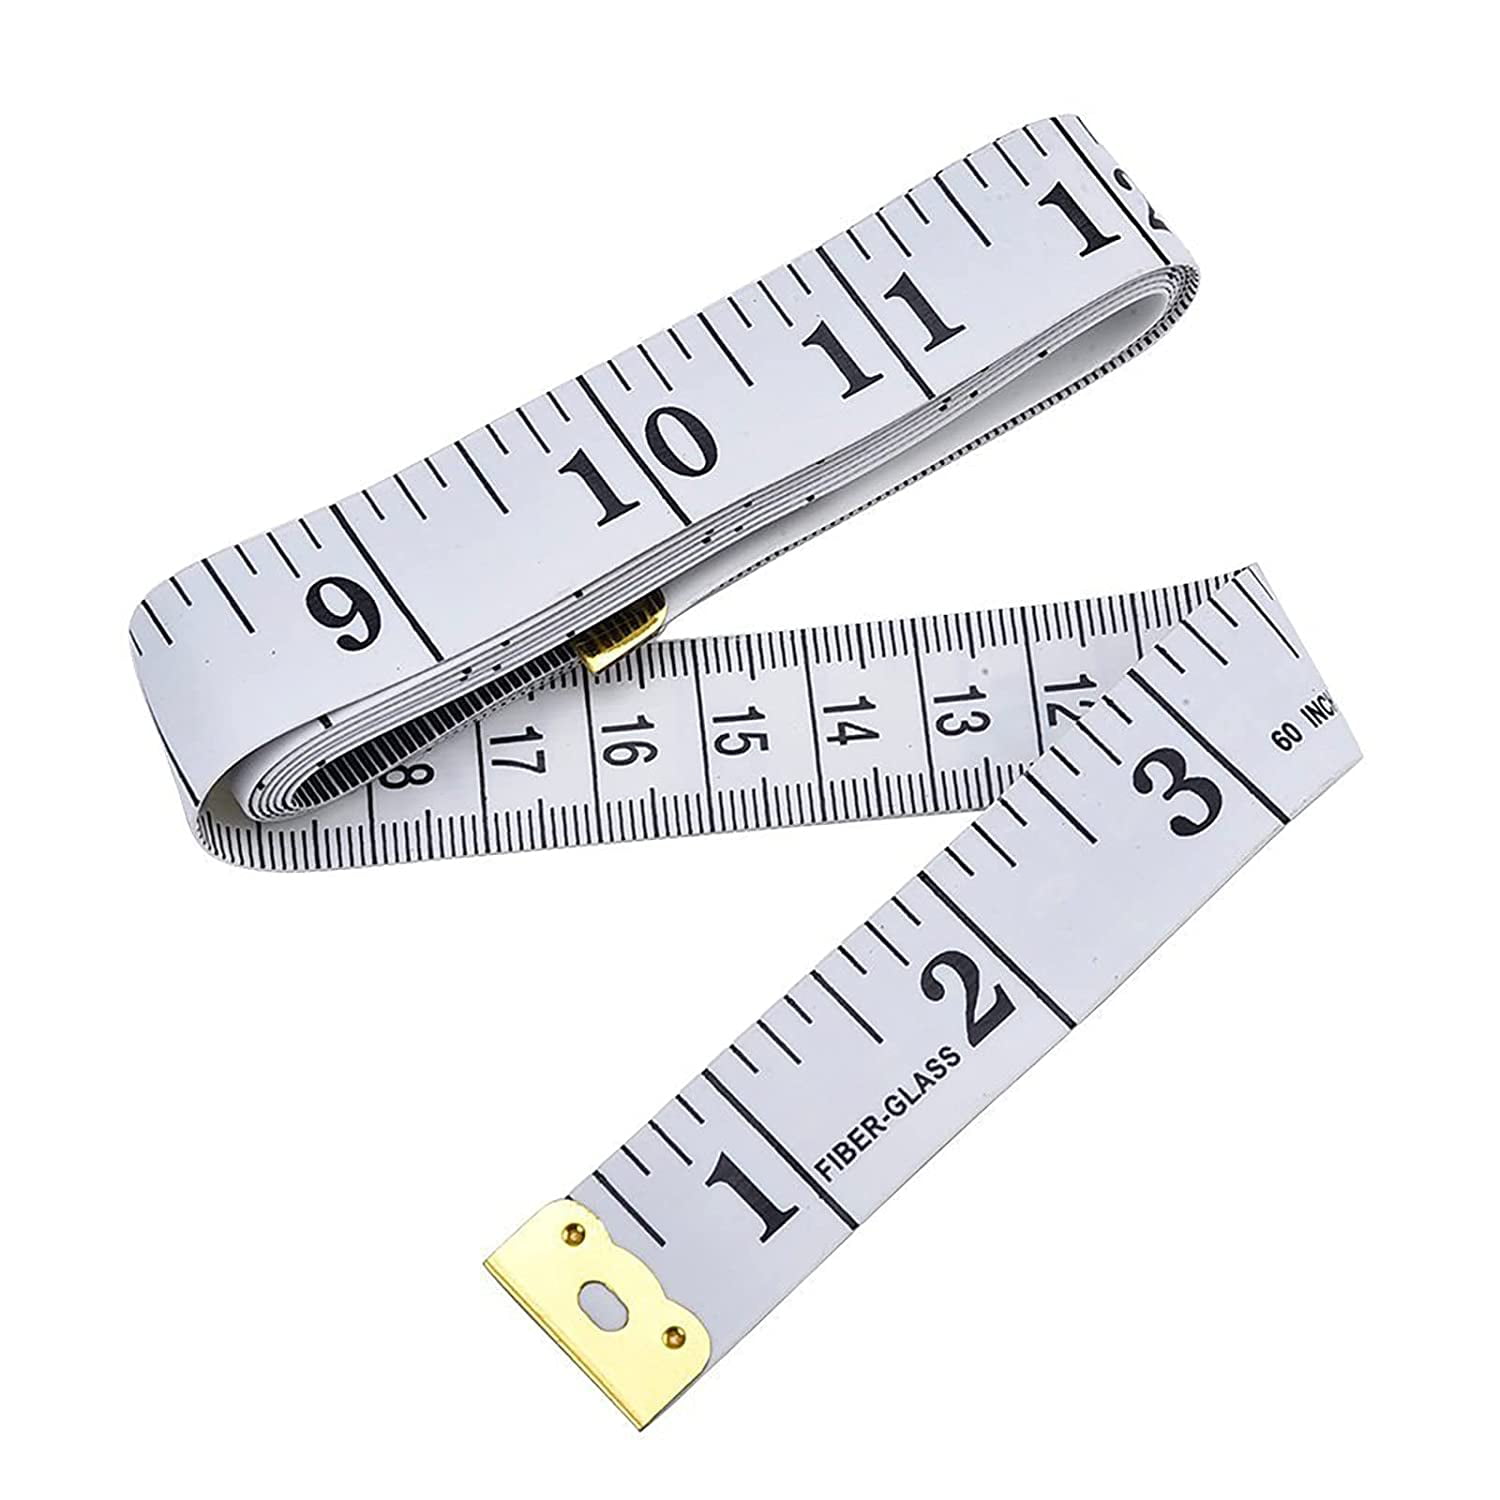 3m Tape Measure, Retractable Soft Tape Measure Dual Sided Flexible Ruler  for Sewing Tailor Body Waist Chest Arms LegsTape Measures